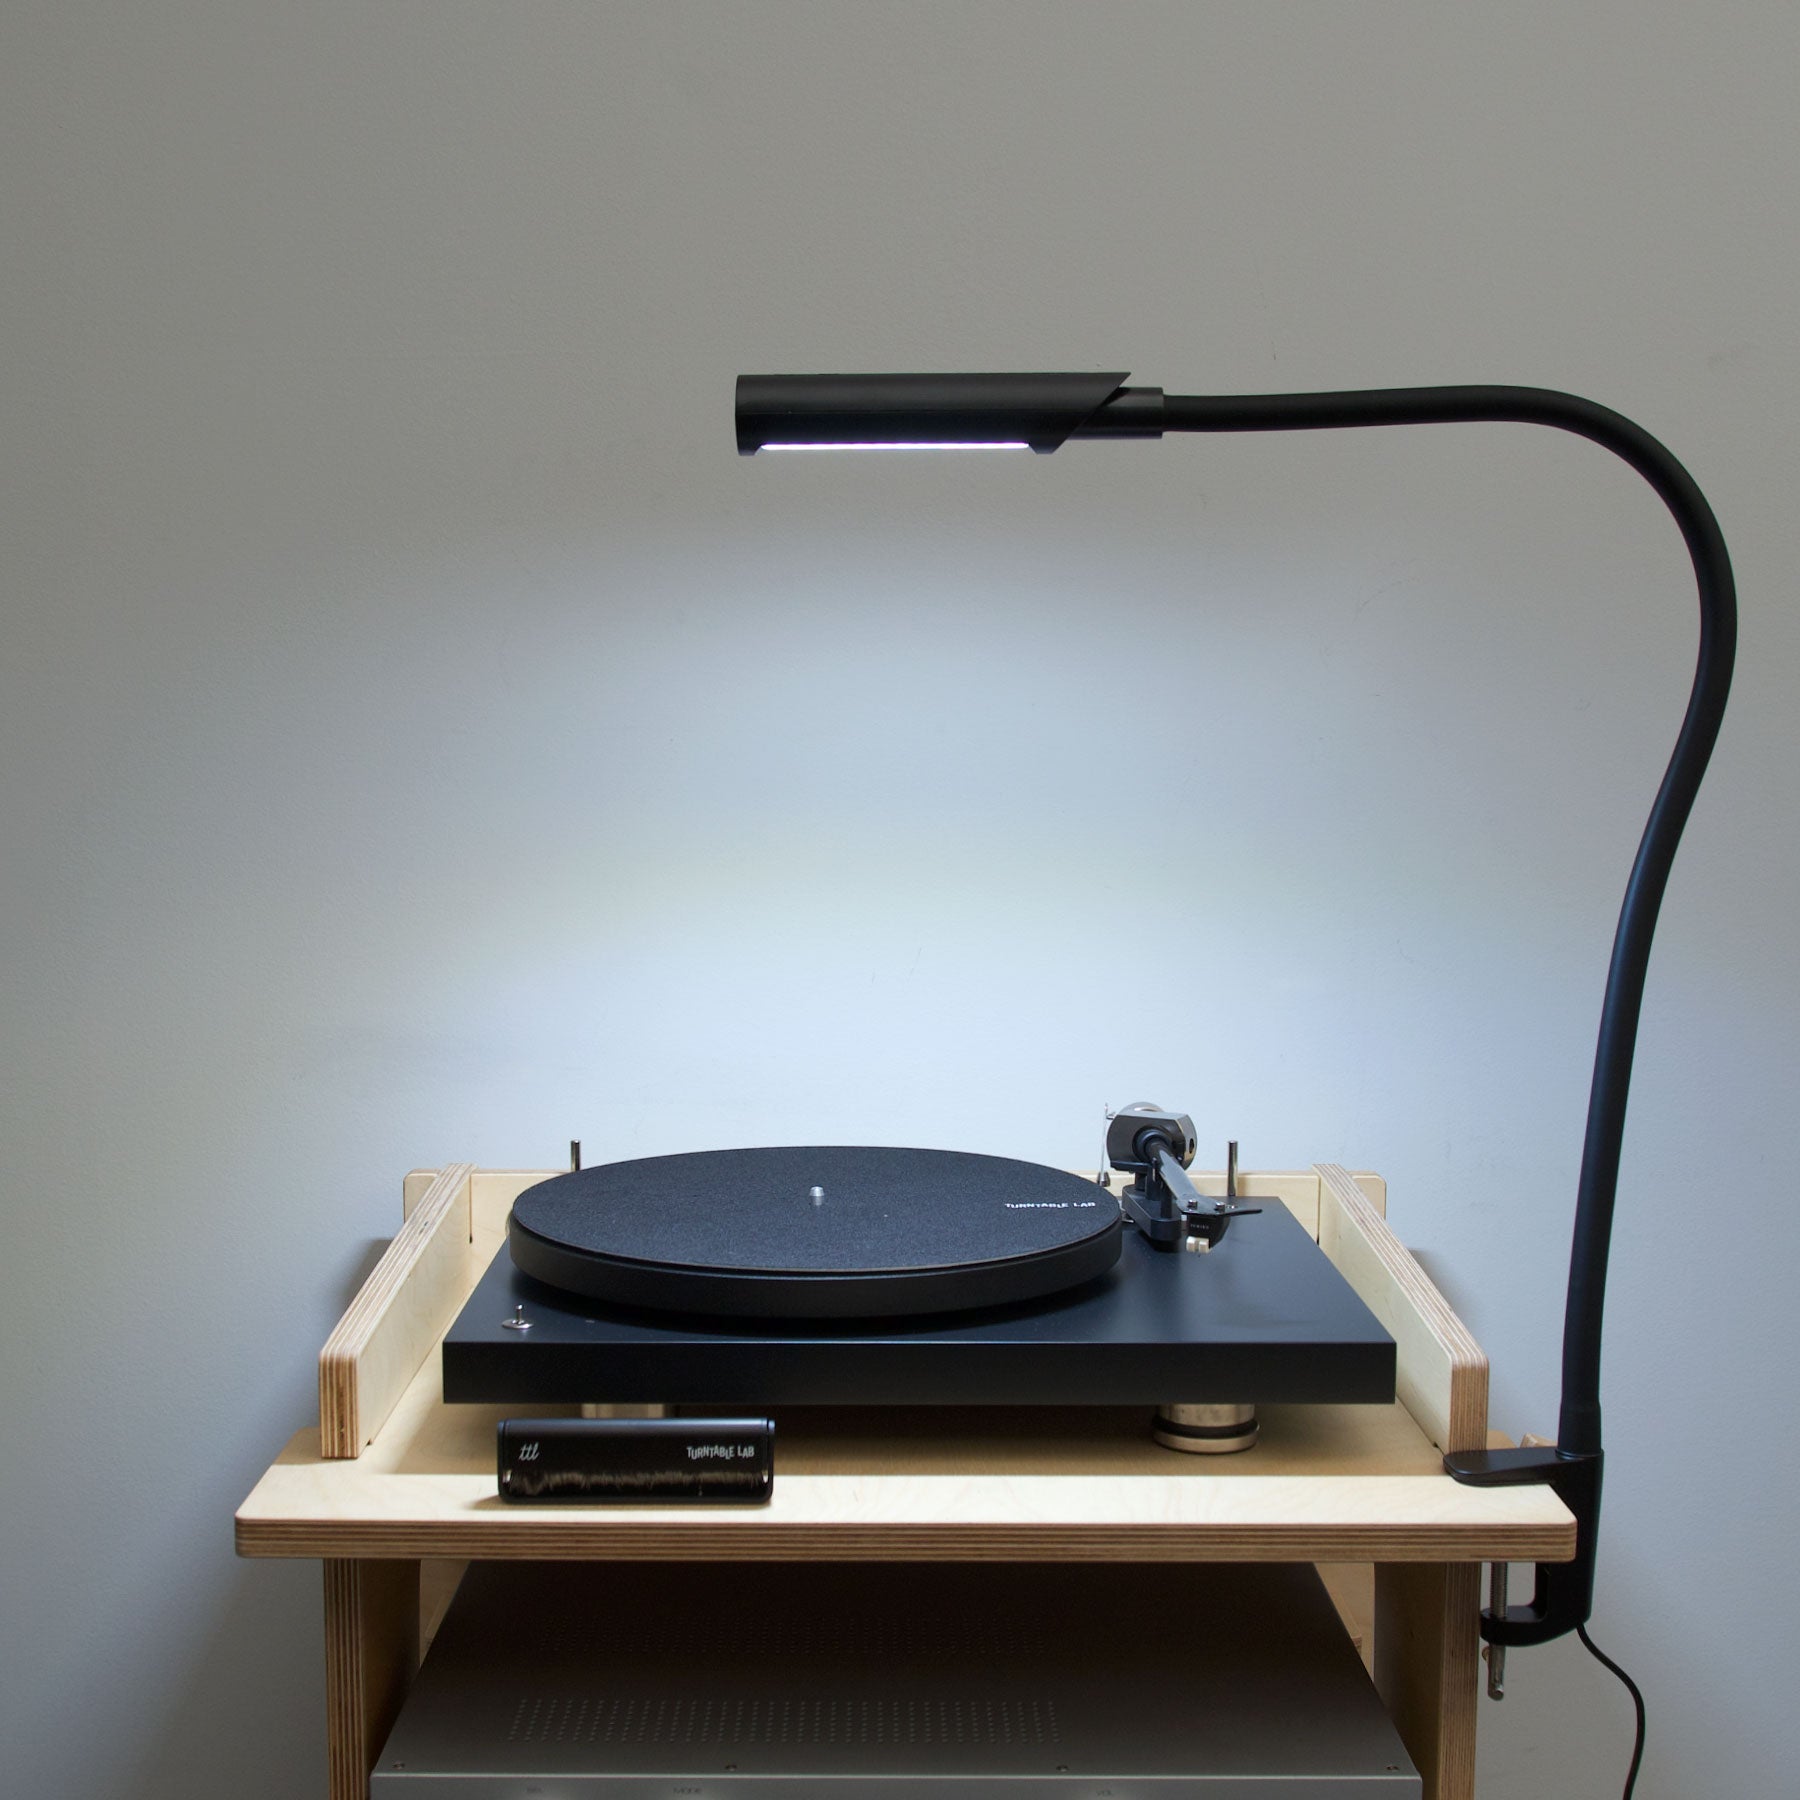 The Ultimate LED Turntable Light? UBERLIGHT FLEX Review - Sound Matters